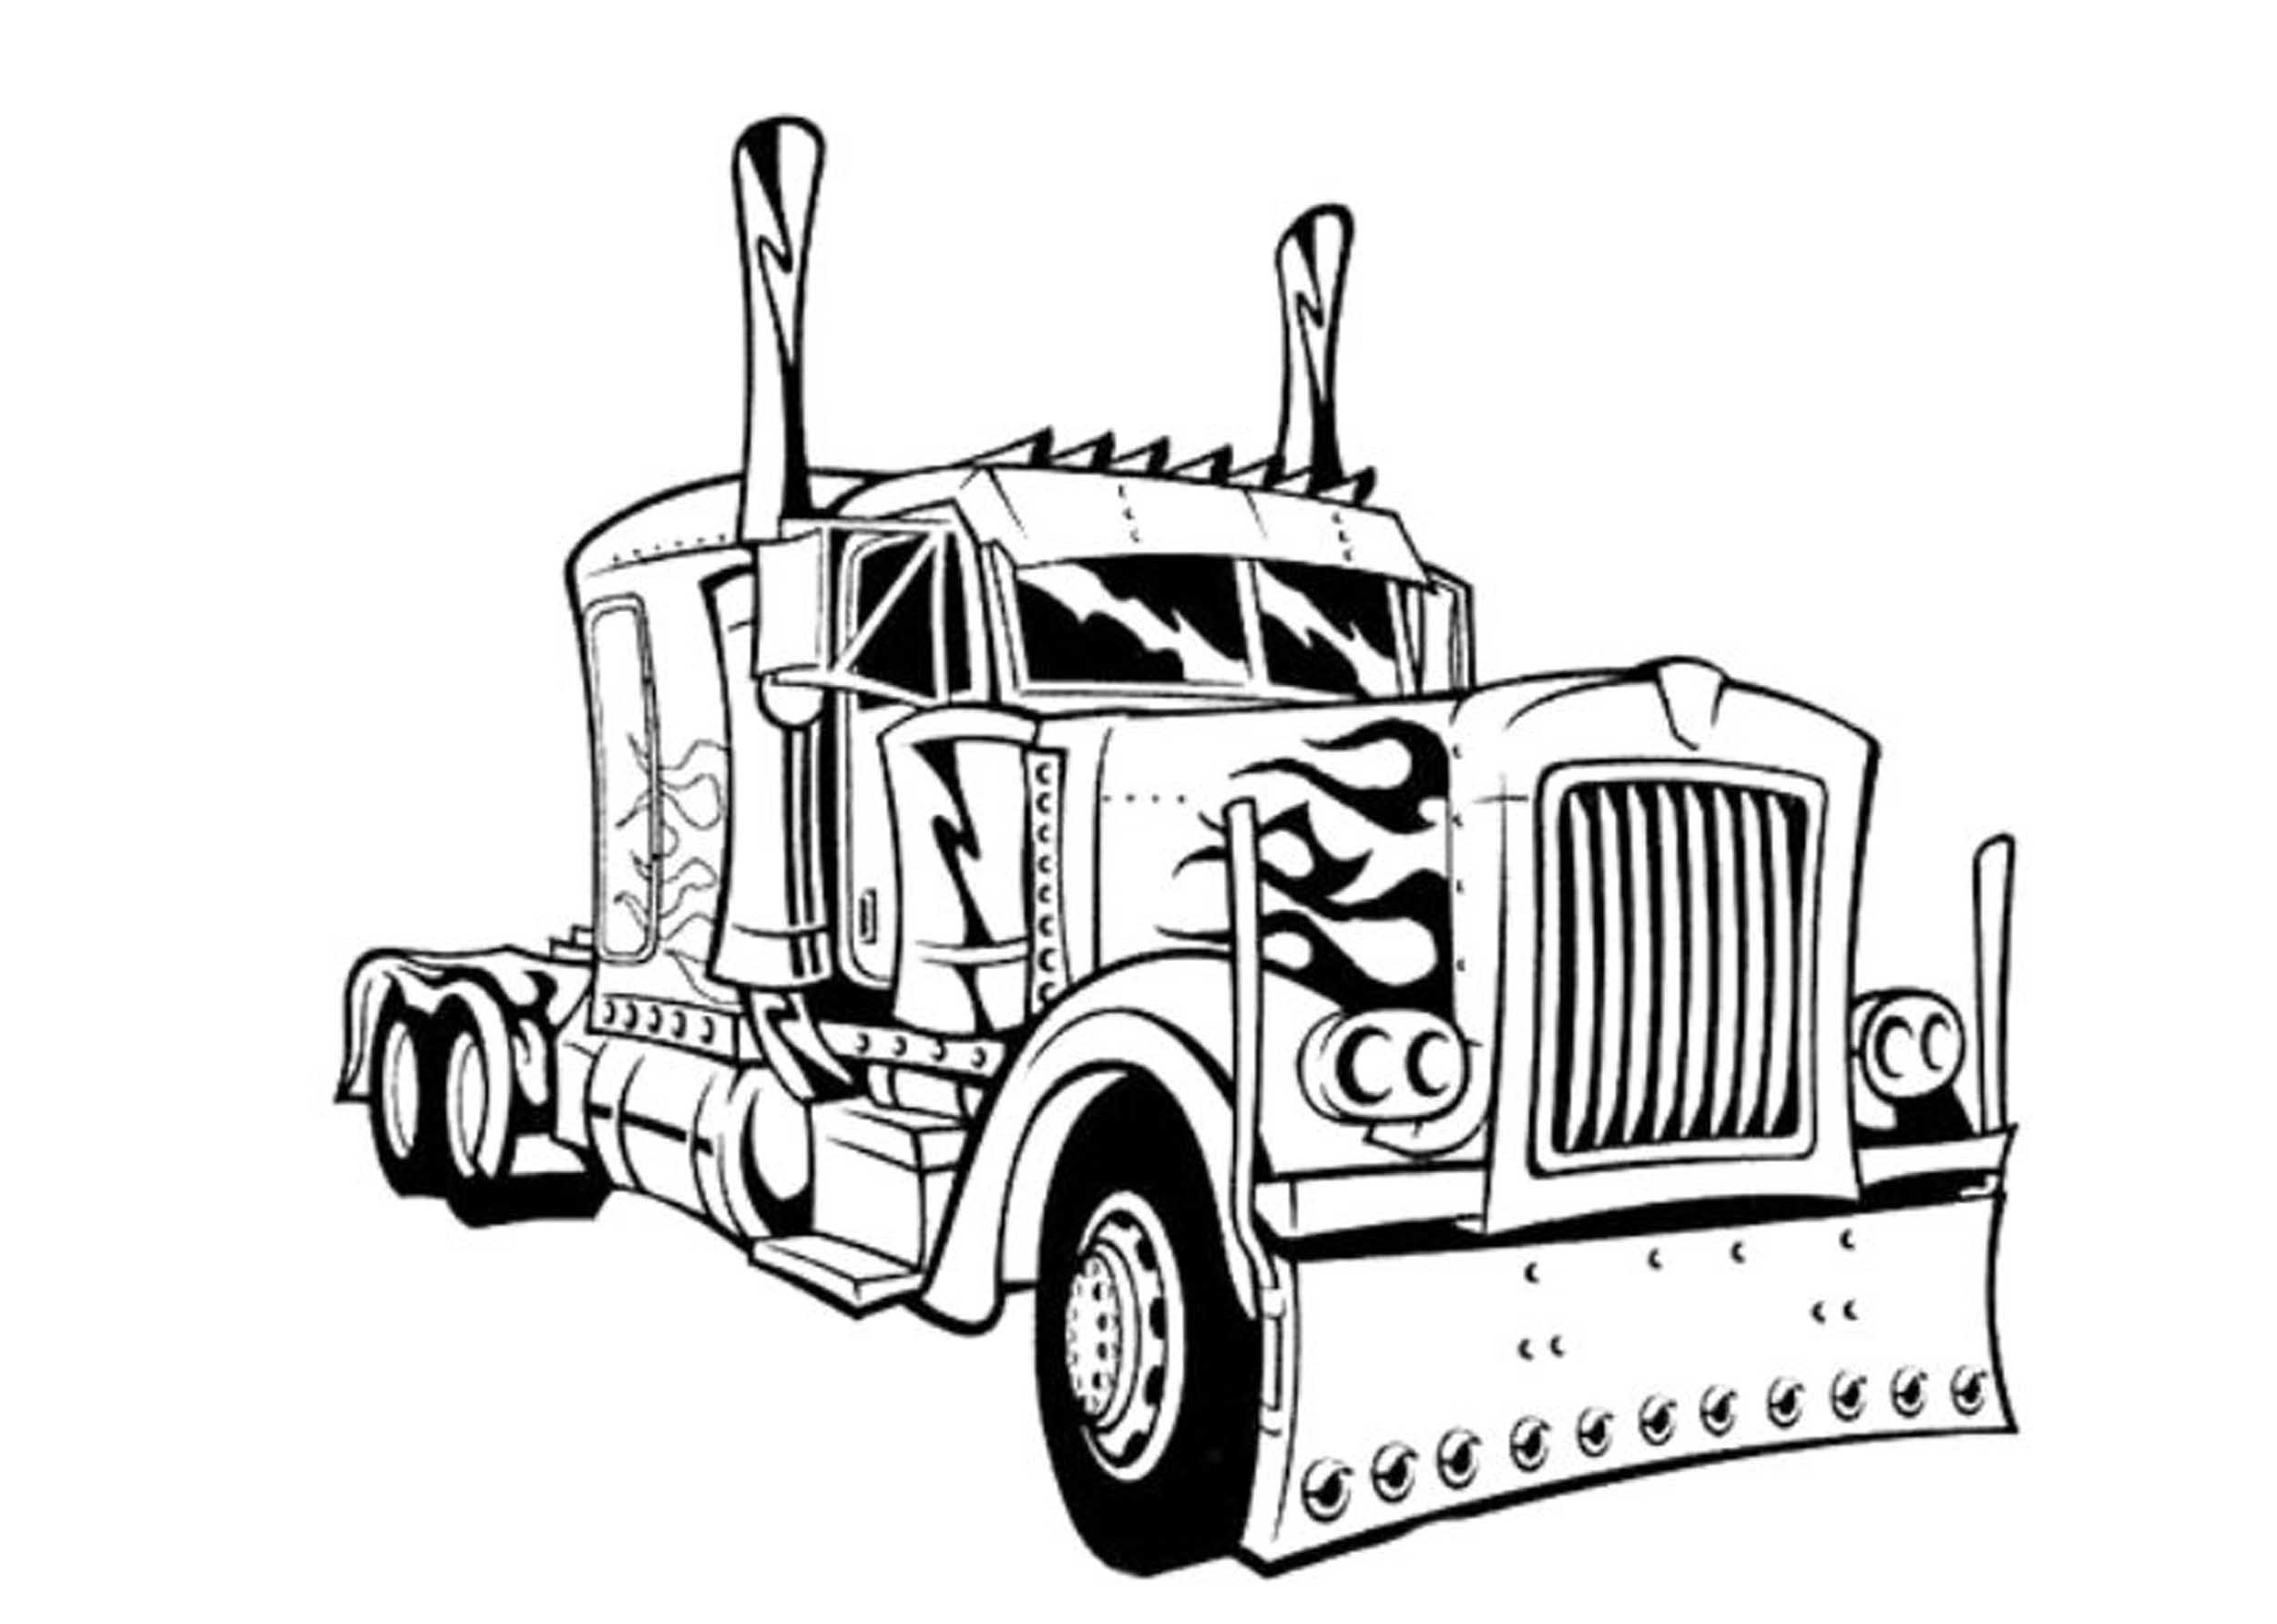 Transformer Optimus Prime Coloring Pages Coloring Home